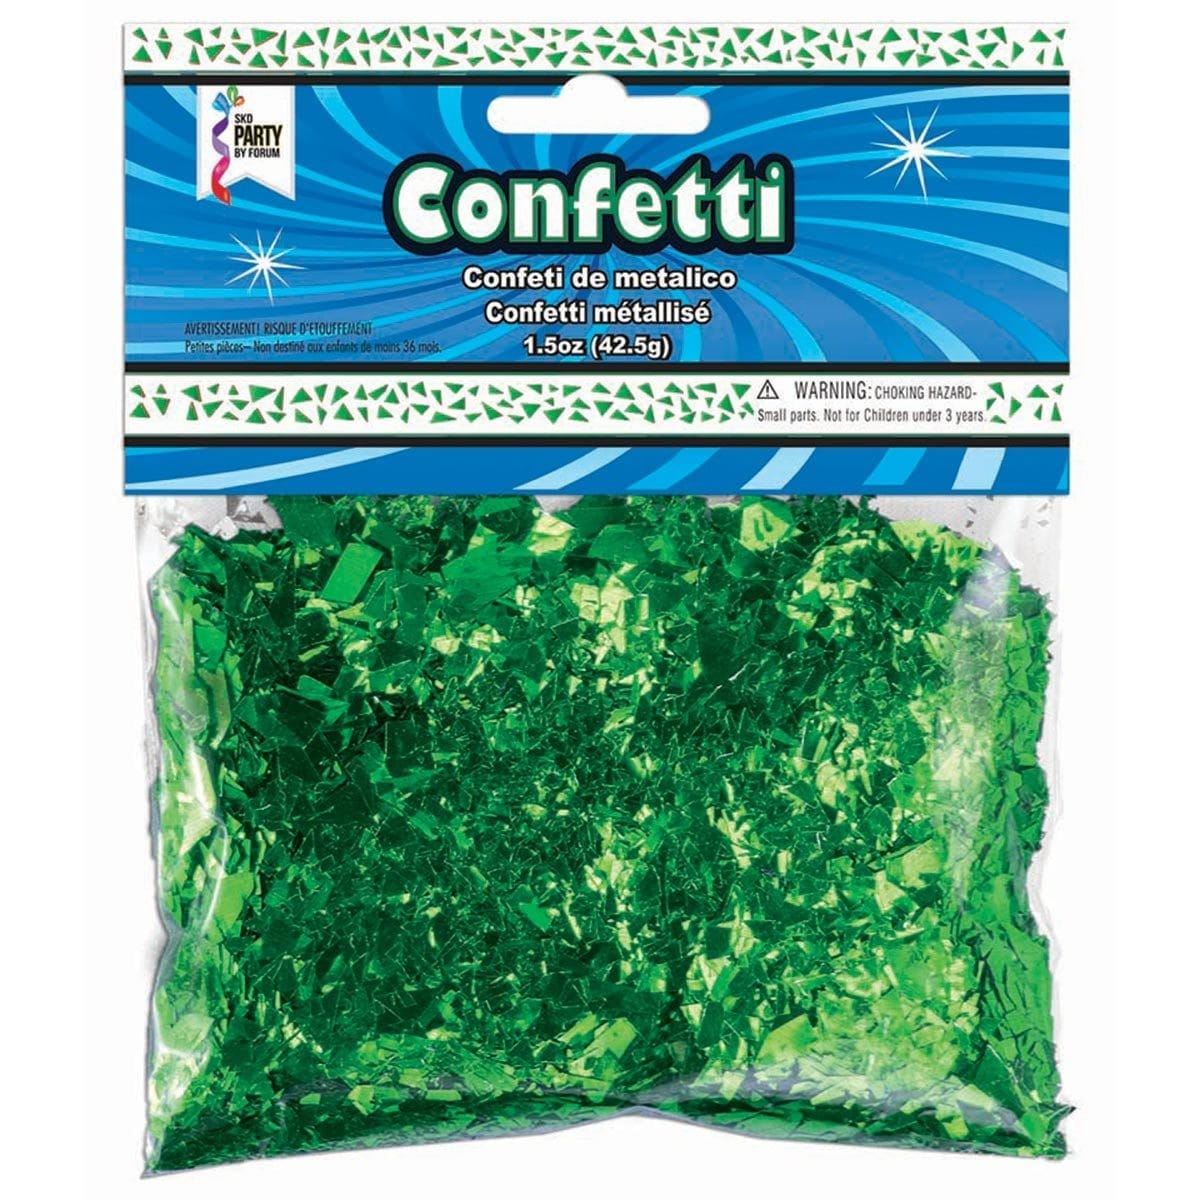 Buy Balloons Green Metallic Confetti, 1.5 Ounce sold at Party Expert